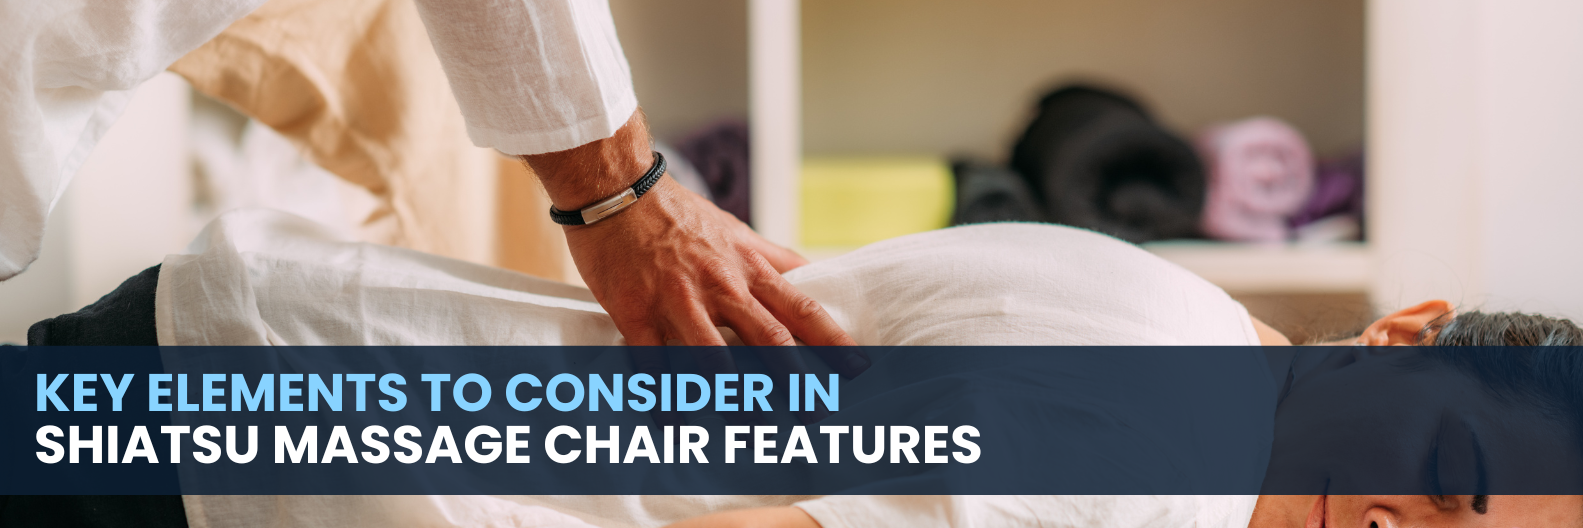 Learn what qualities and components are most important to seek for in the best Shiatsu massage chair to achieve the highest level of comfort and relaxation.